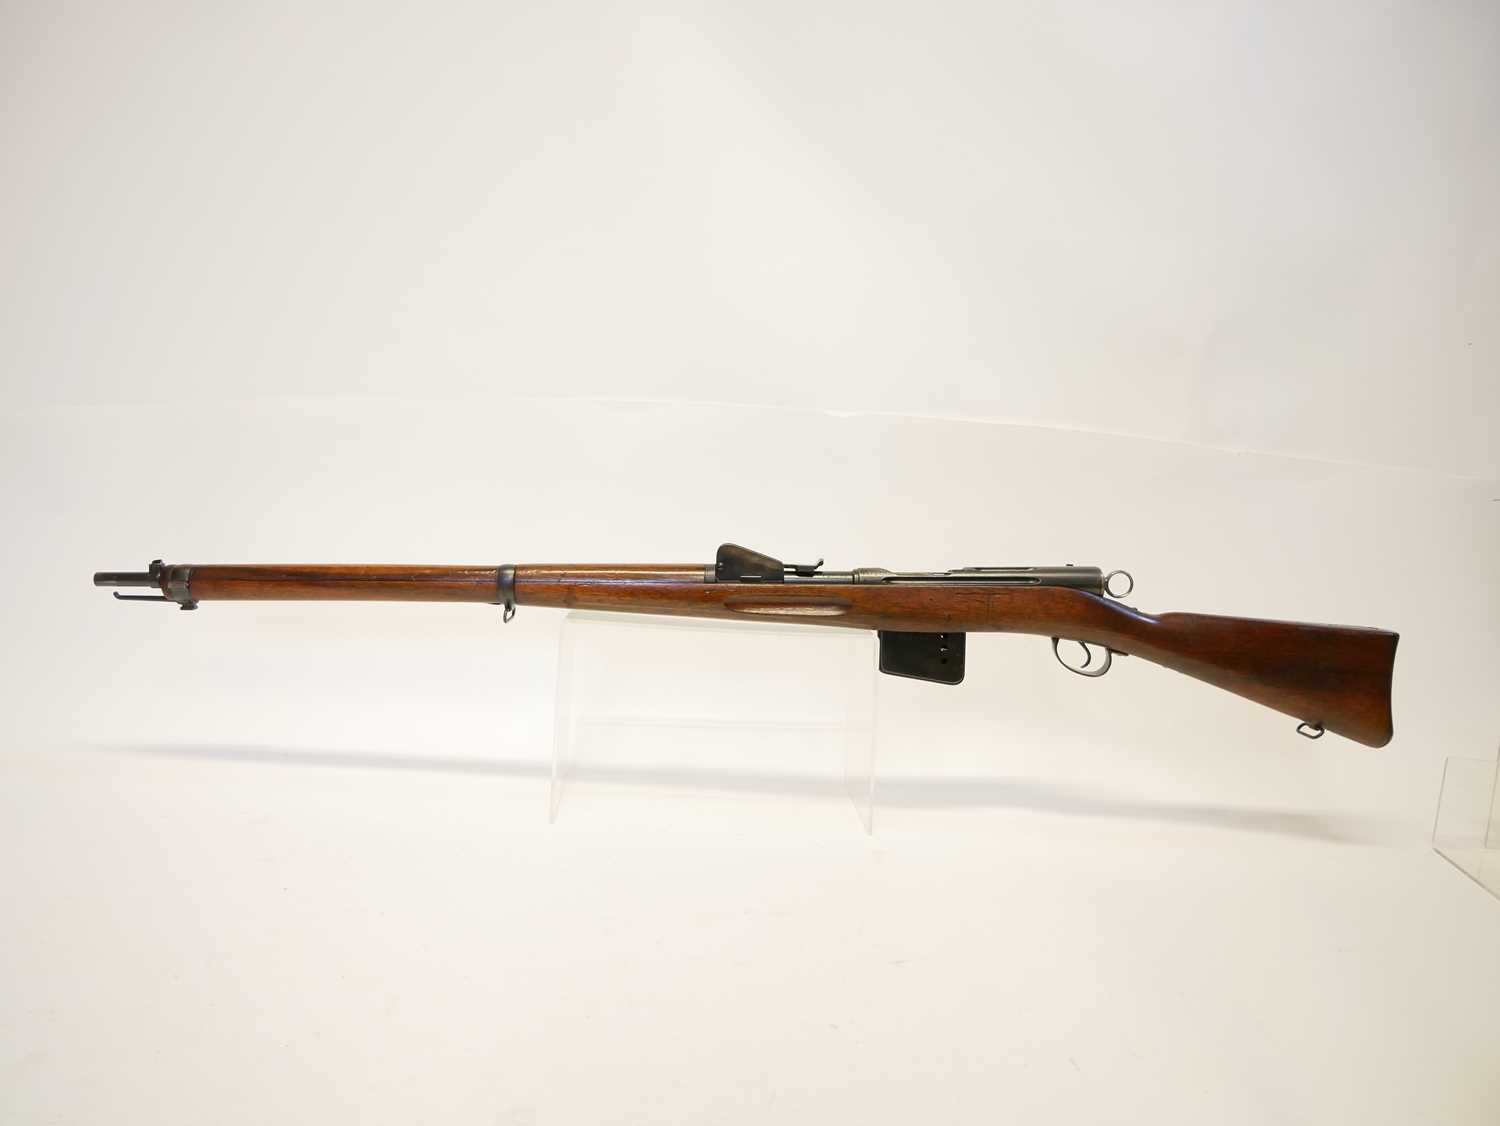 Schmidt Rubin 1889 7.5x 53.5mm straight pull rifle, matching serial numbers 119667, with 30" barrel, - Image 18 of 20